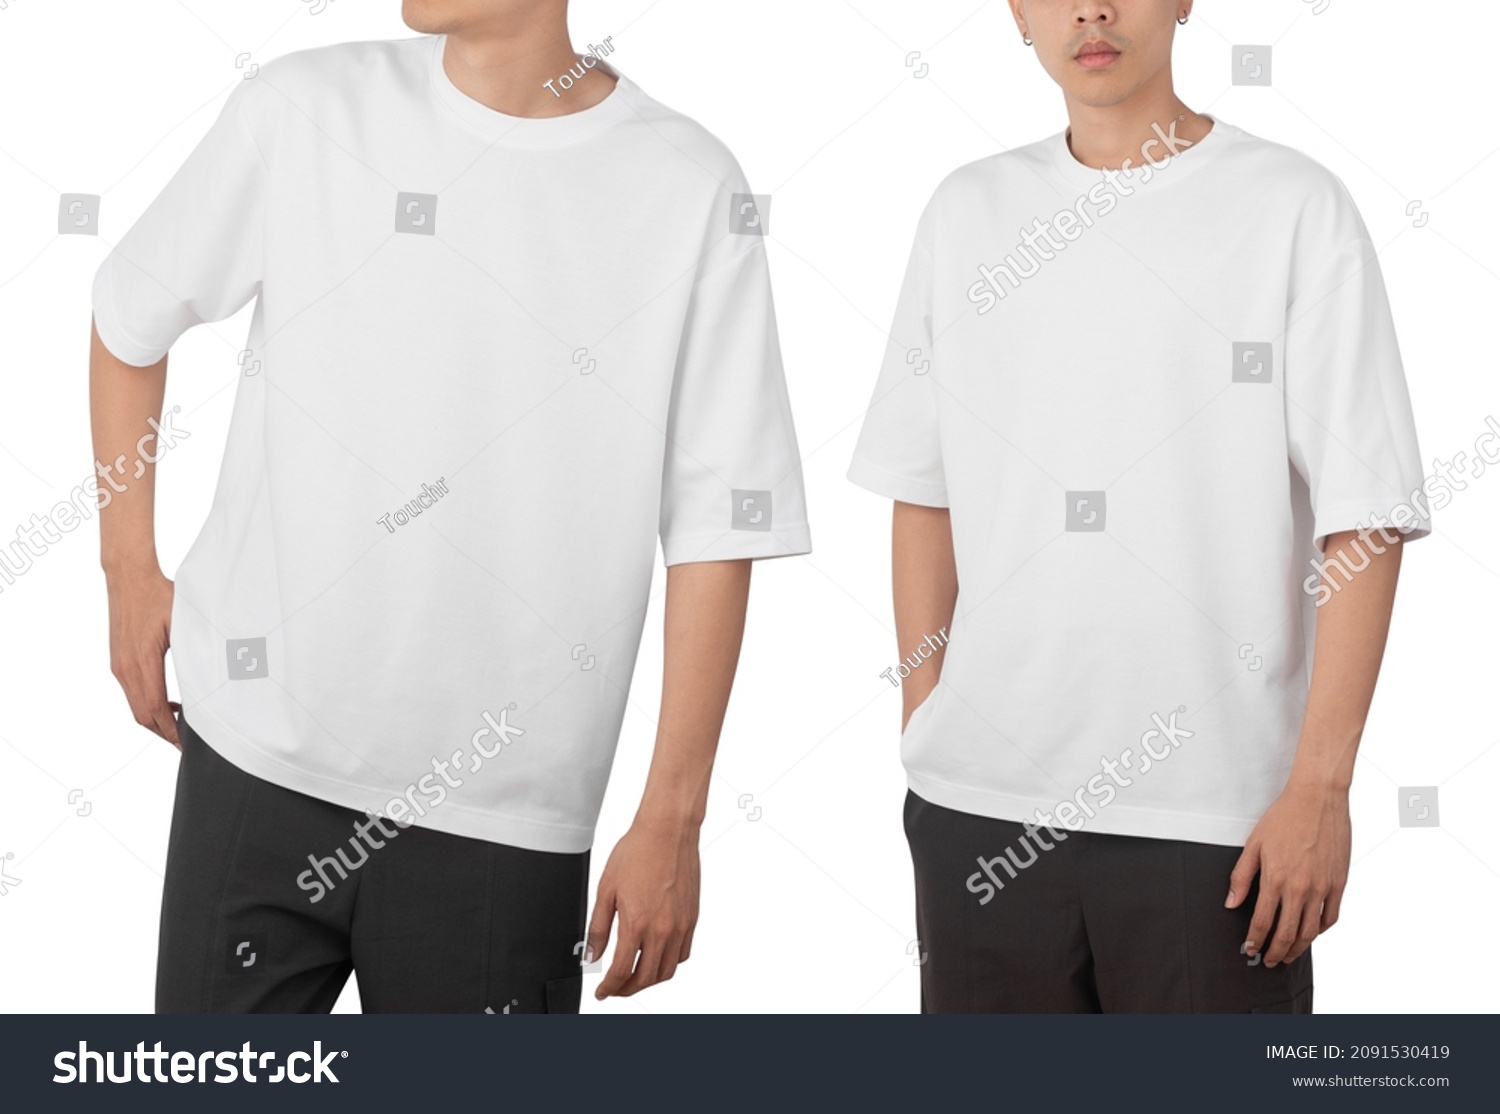 Young man in blank oversize t-shirt mockup front and back used as design template, isolated on white background with clipping path. #2091530419